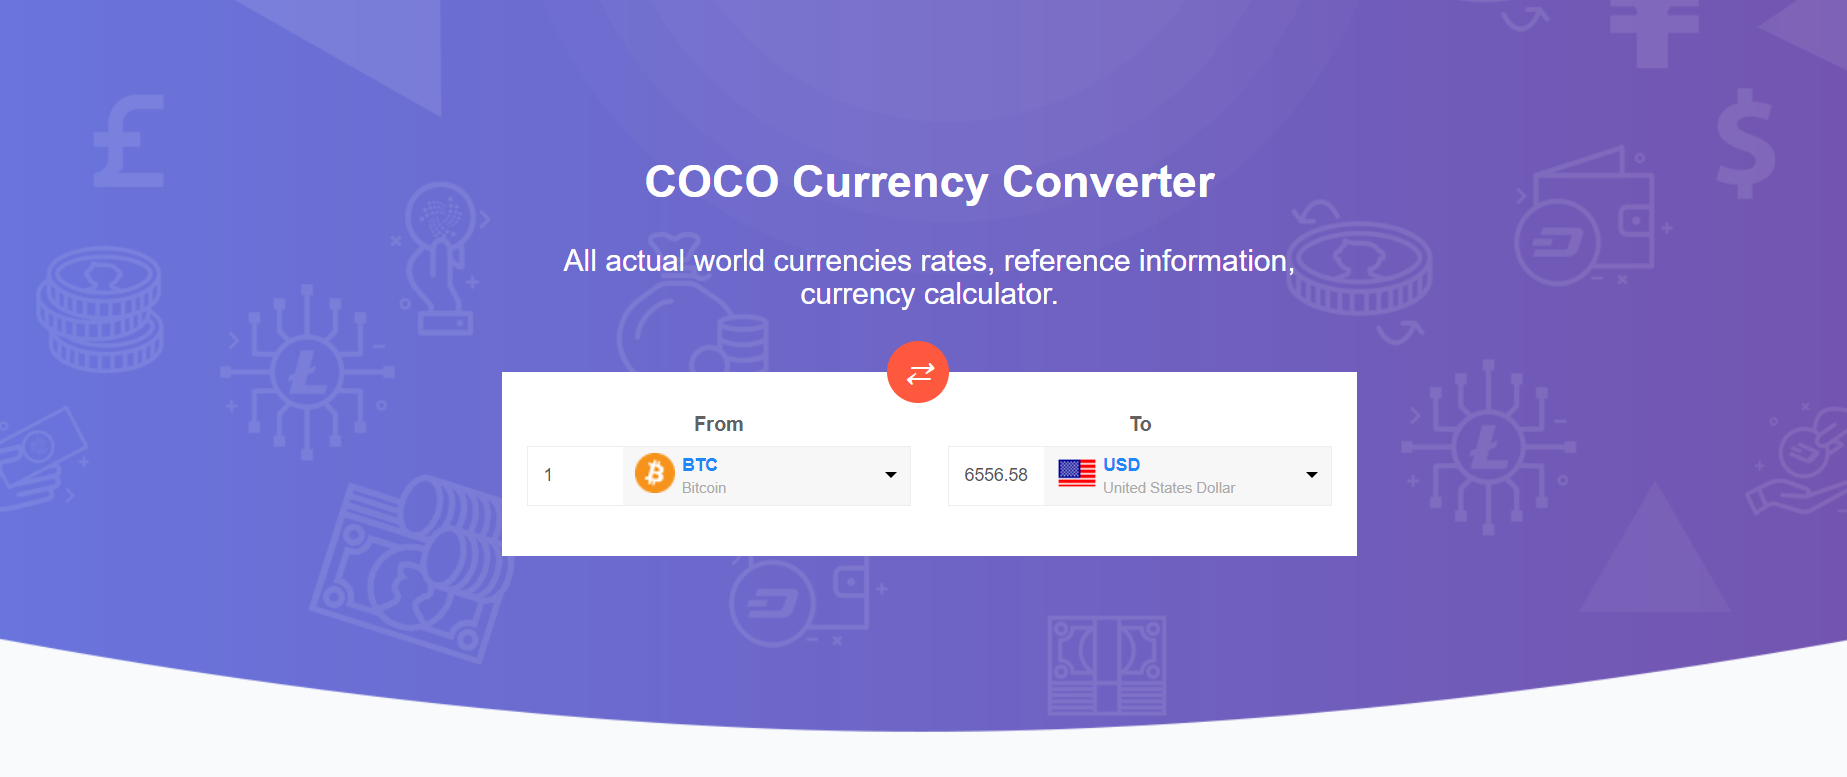 Coco - Currency Converter